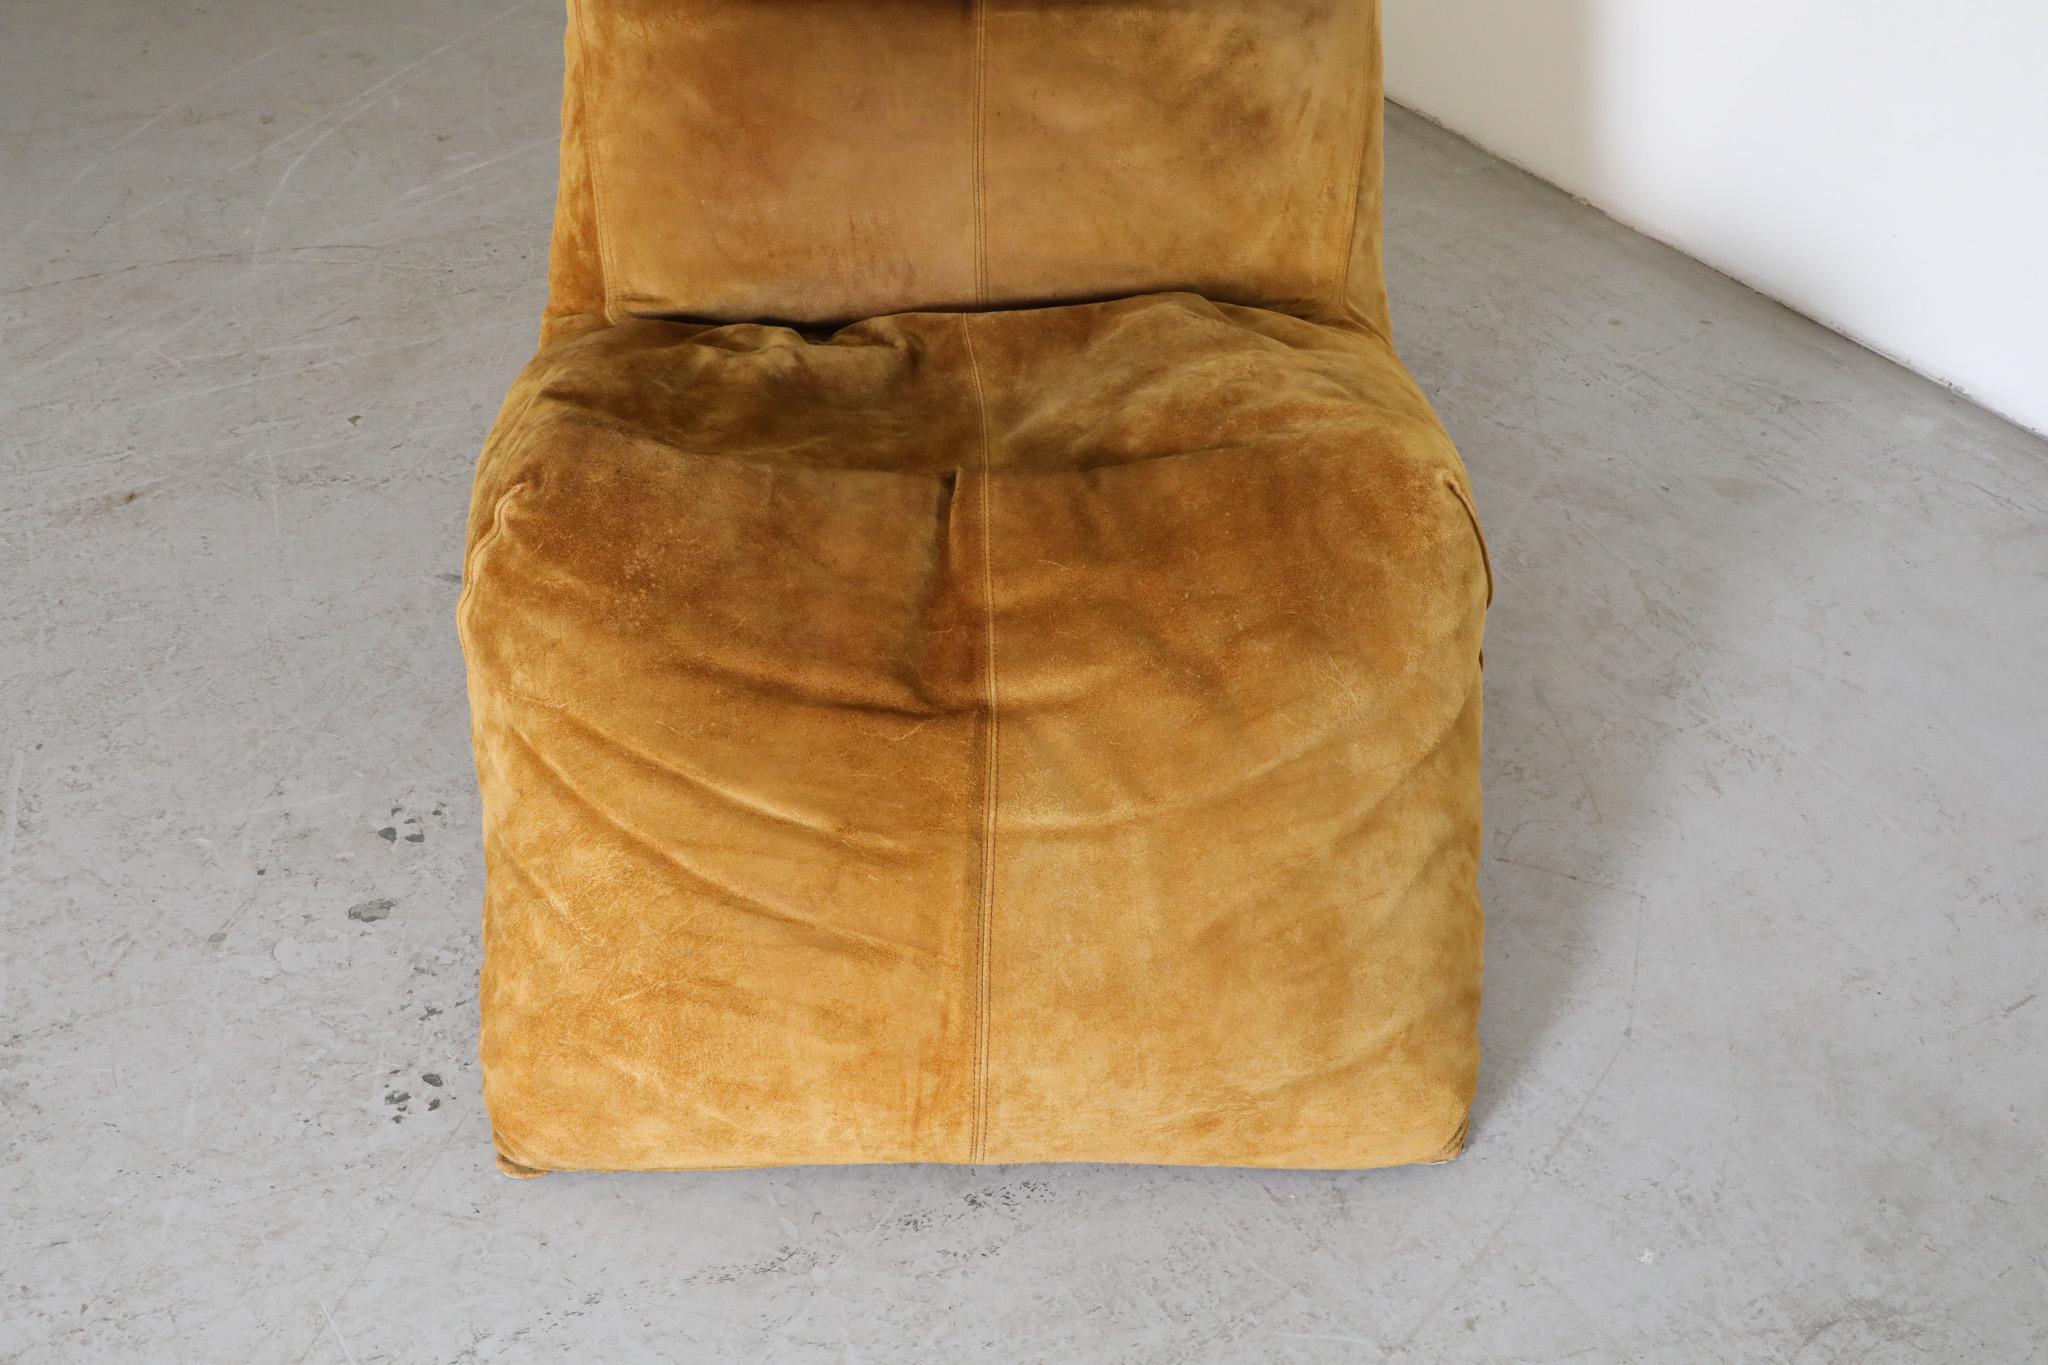 Le Bambole Chaise Lounge in Butterscotch Suede by Mario Bellini for C&B Italia For Sale 10